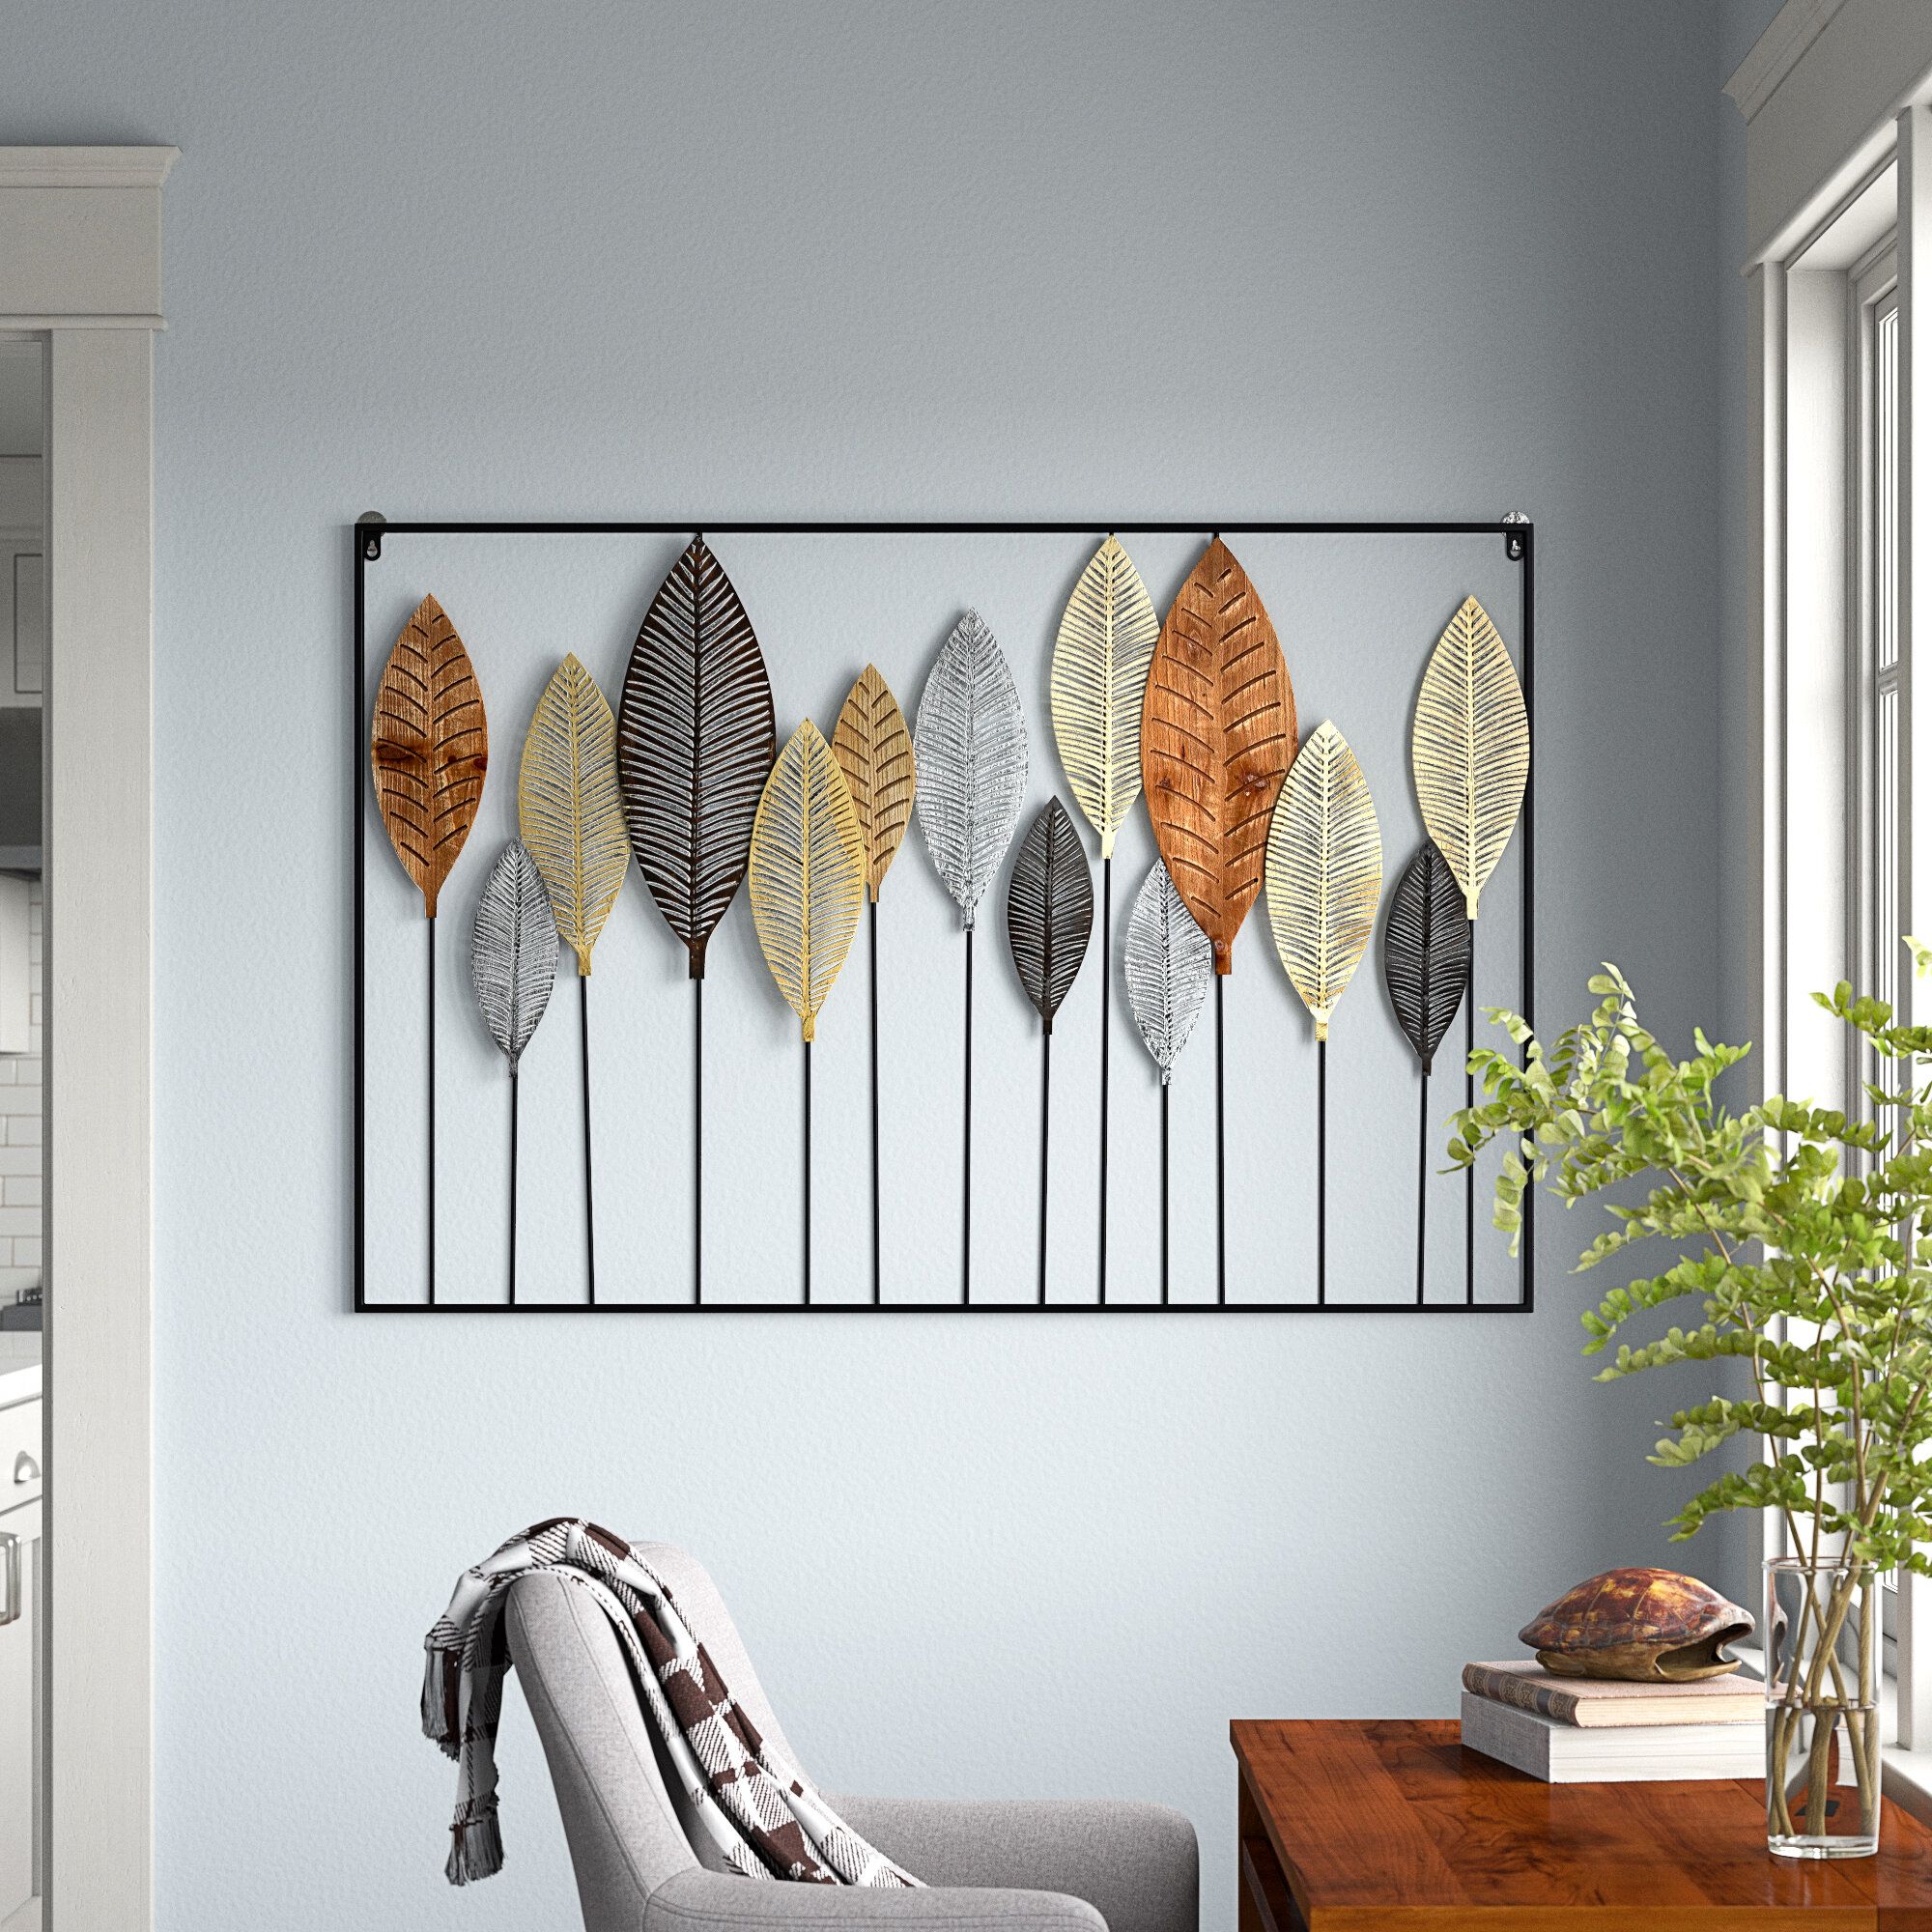 Andover Mills™ Multi Colored Metal Tall Cut Out Leaf Wall Décor With  Intricate Laser Cut Designs 47" X 1" X 32" & Reviews | Wayfair For Most Recently Released Tall Cut Out Leaf Wall Art (Gallery 1 of 20)